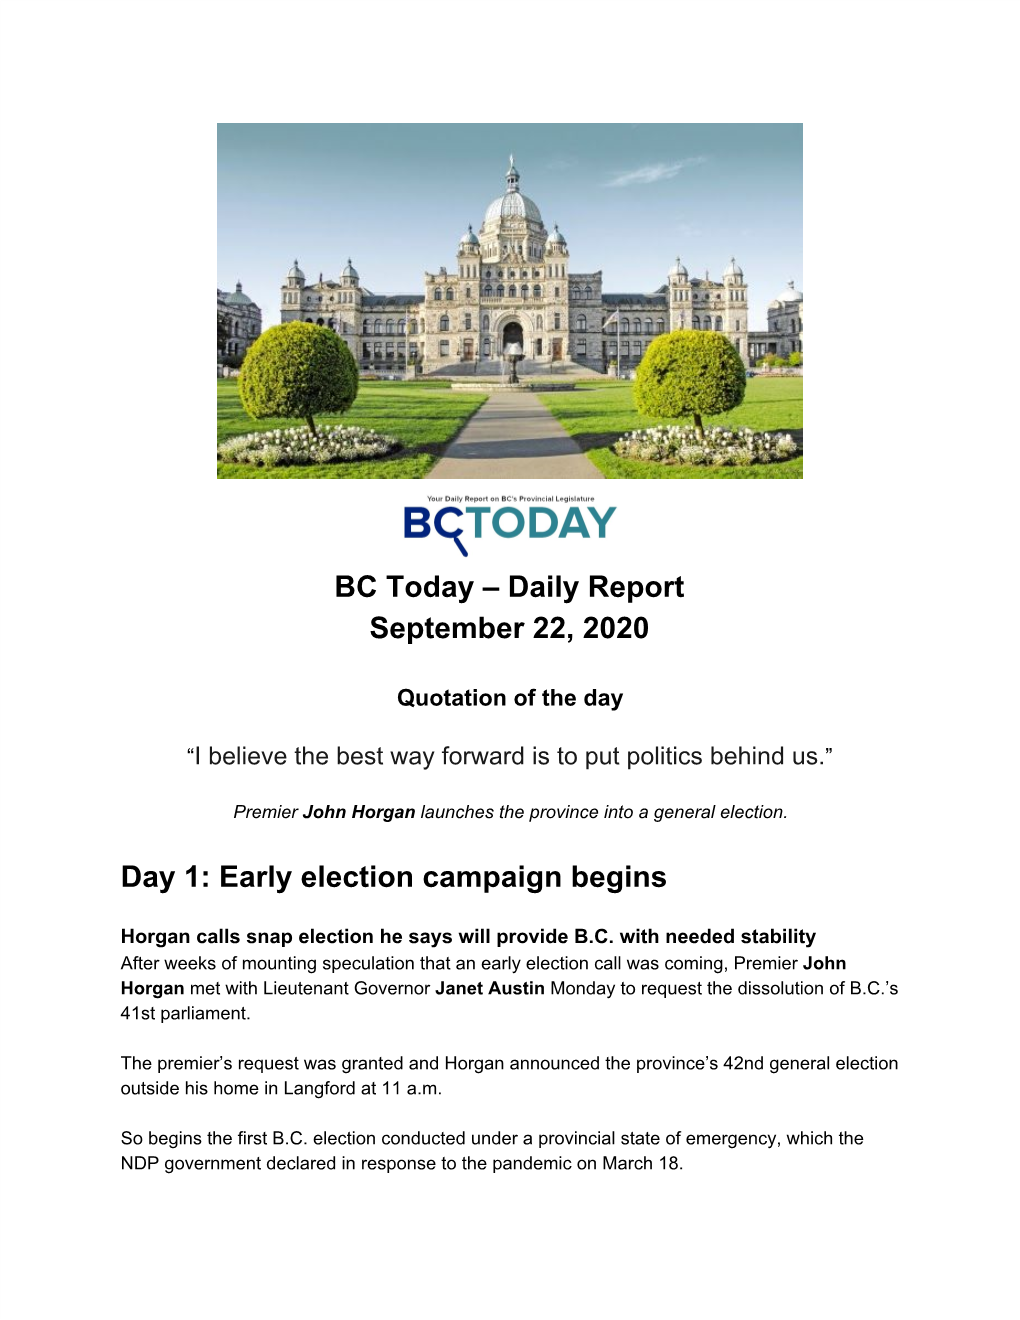 BC Today – Daily Report September 22, 2020 Day 1: Early Election